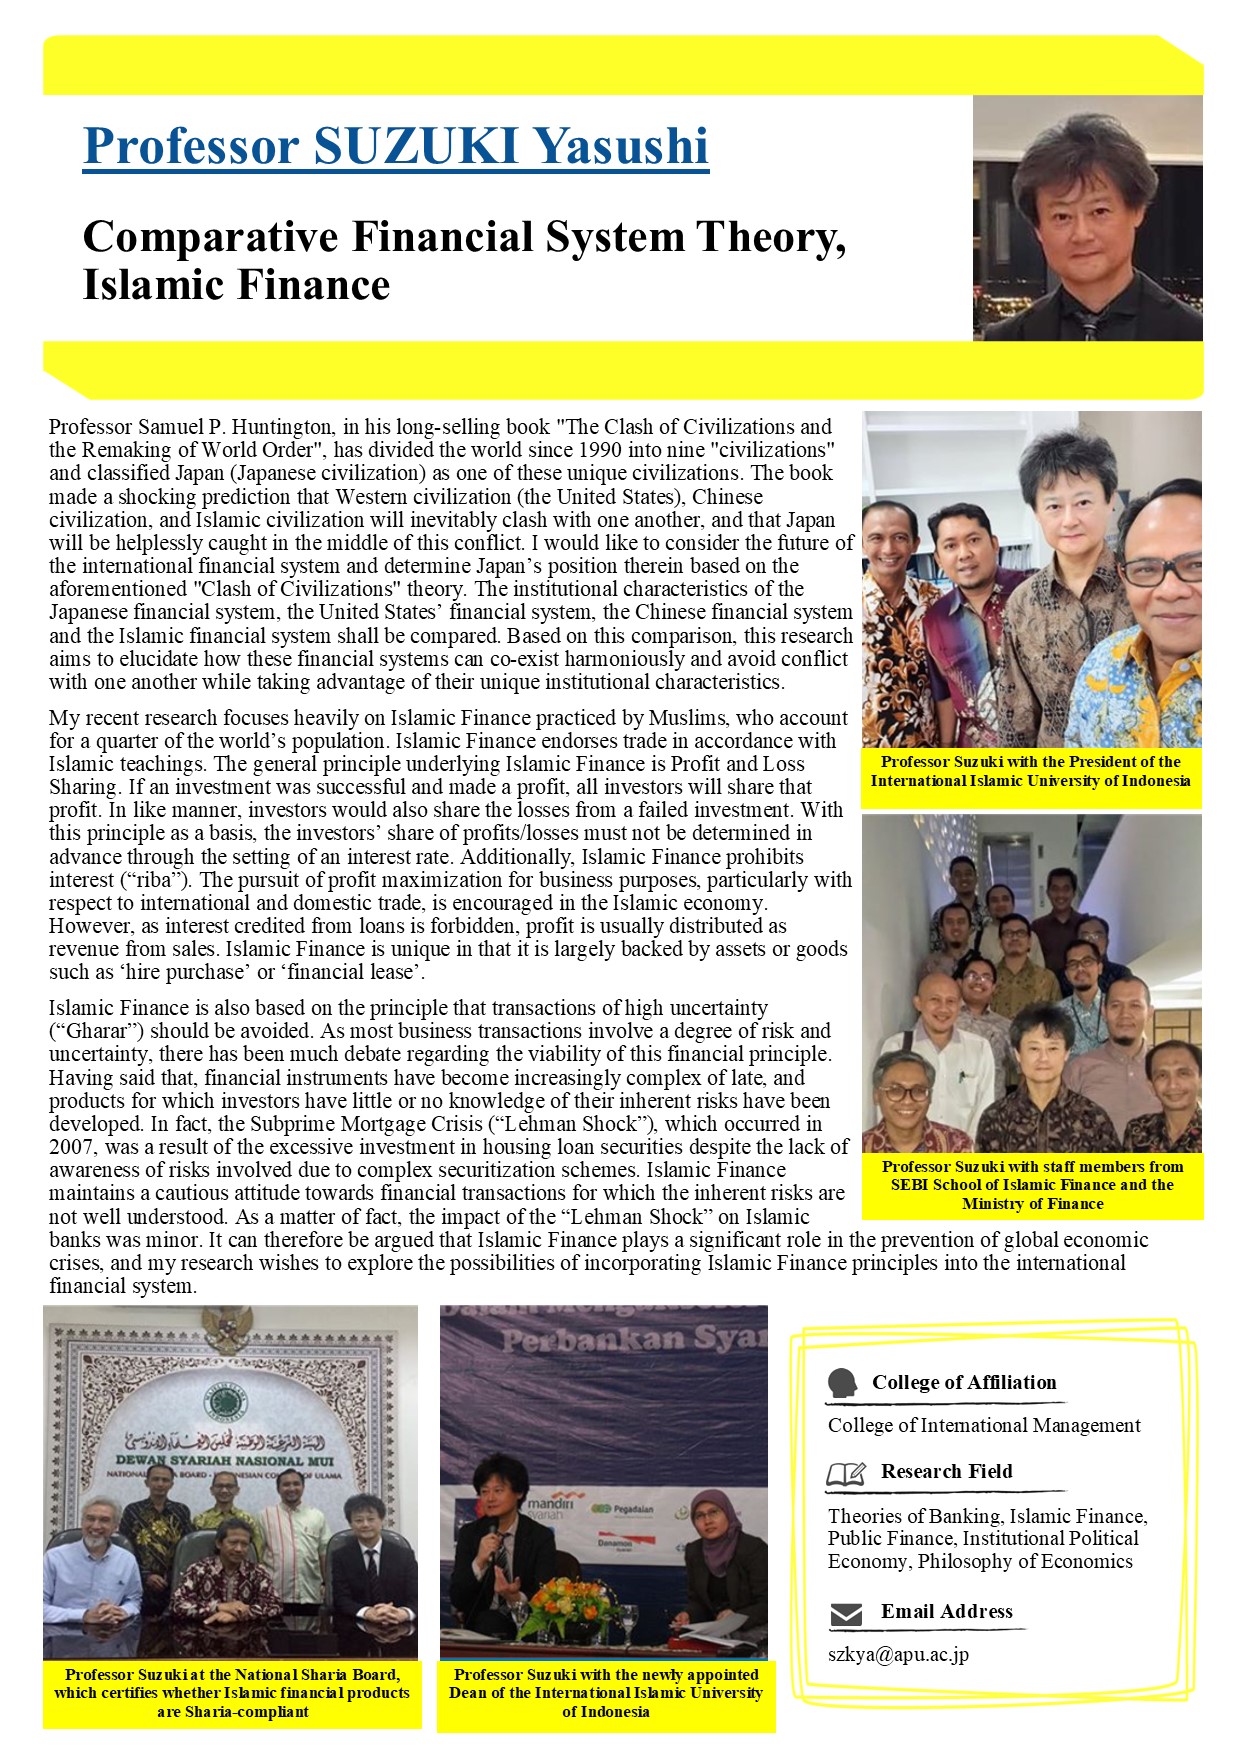 Comparative Financial System Theory, Islamic Finance